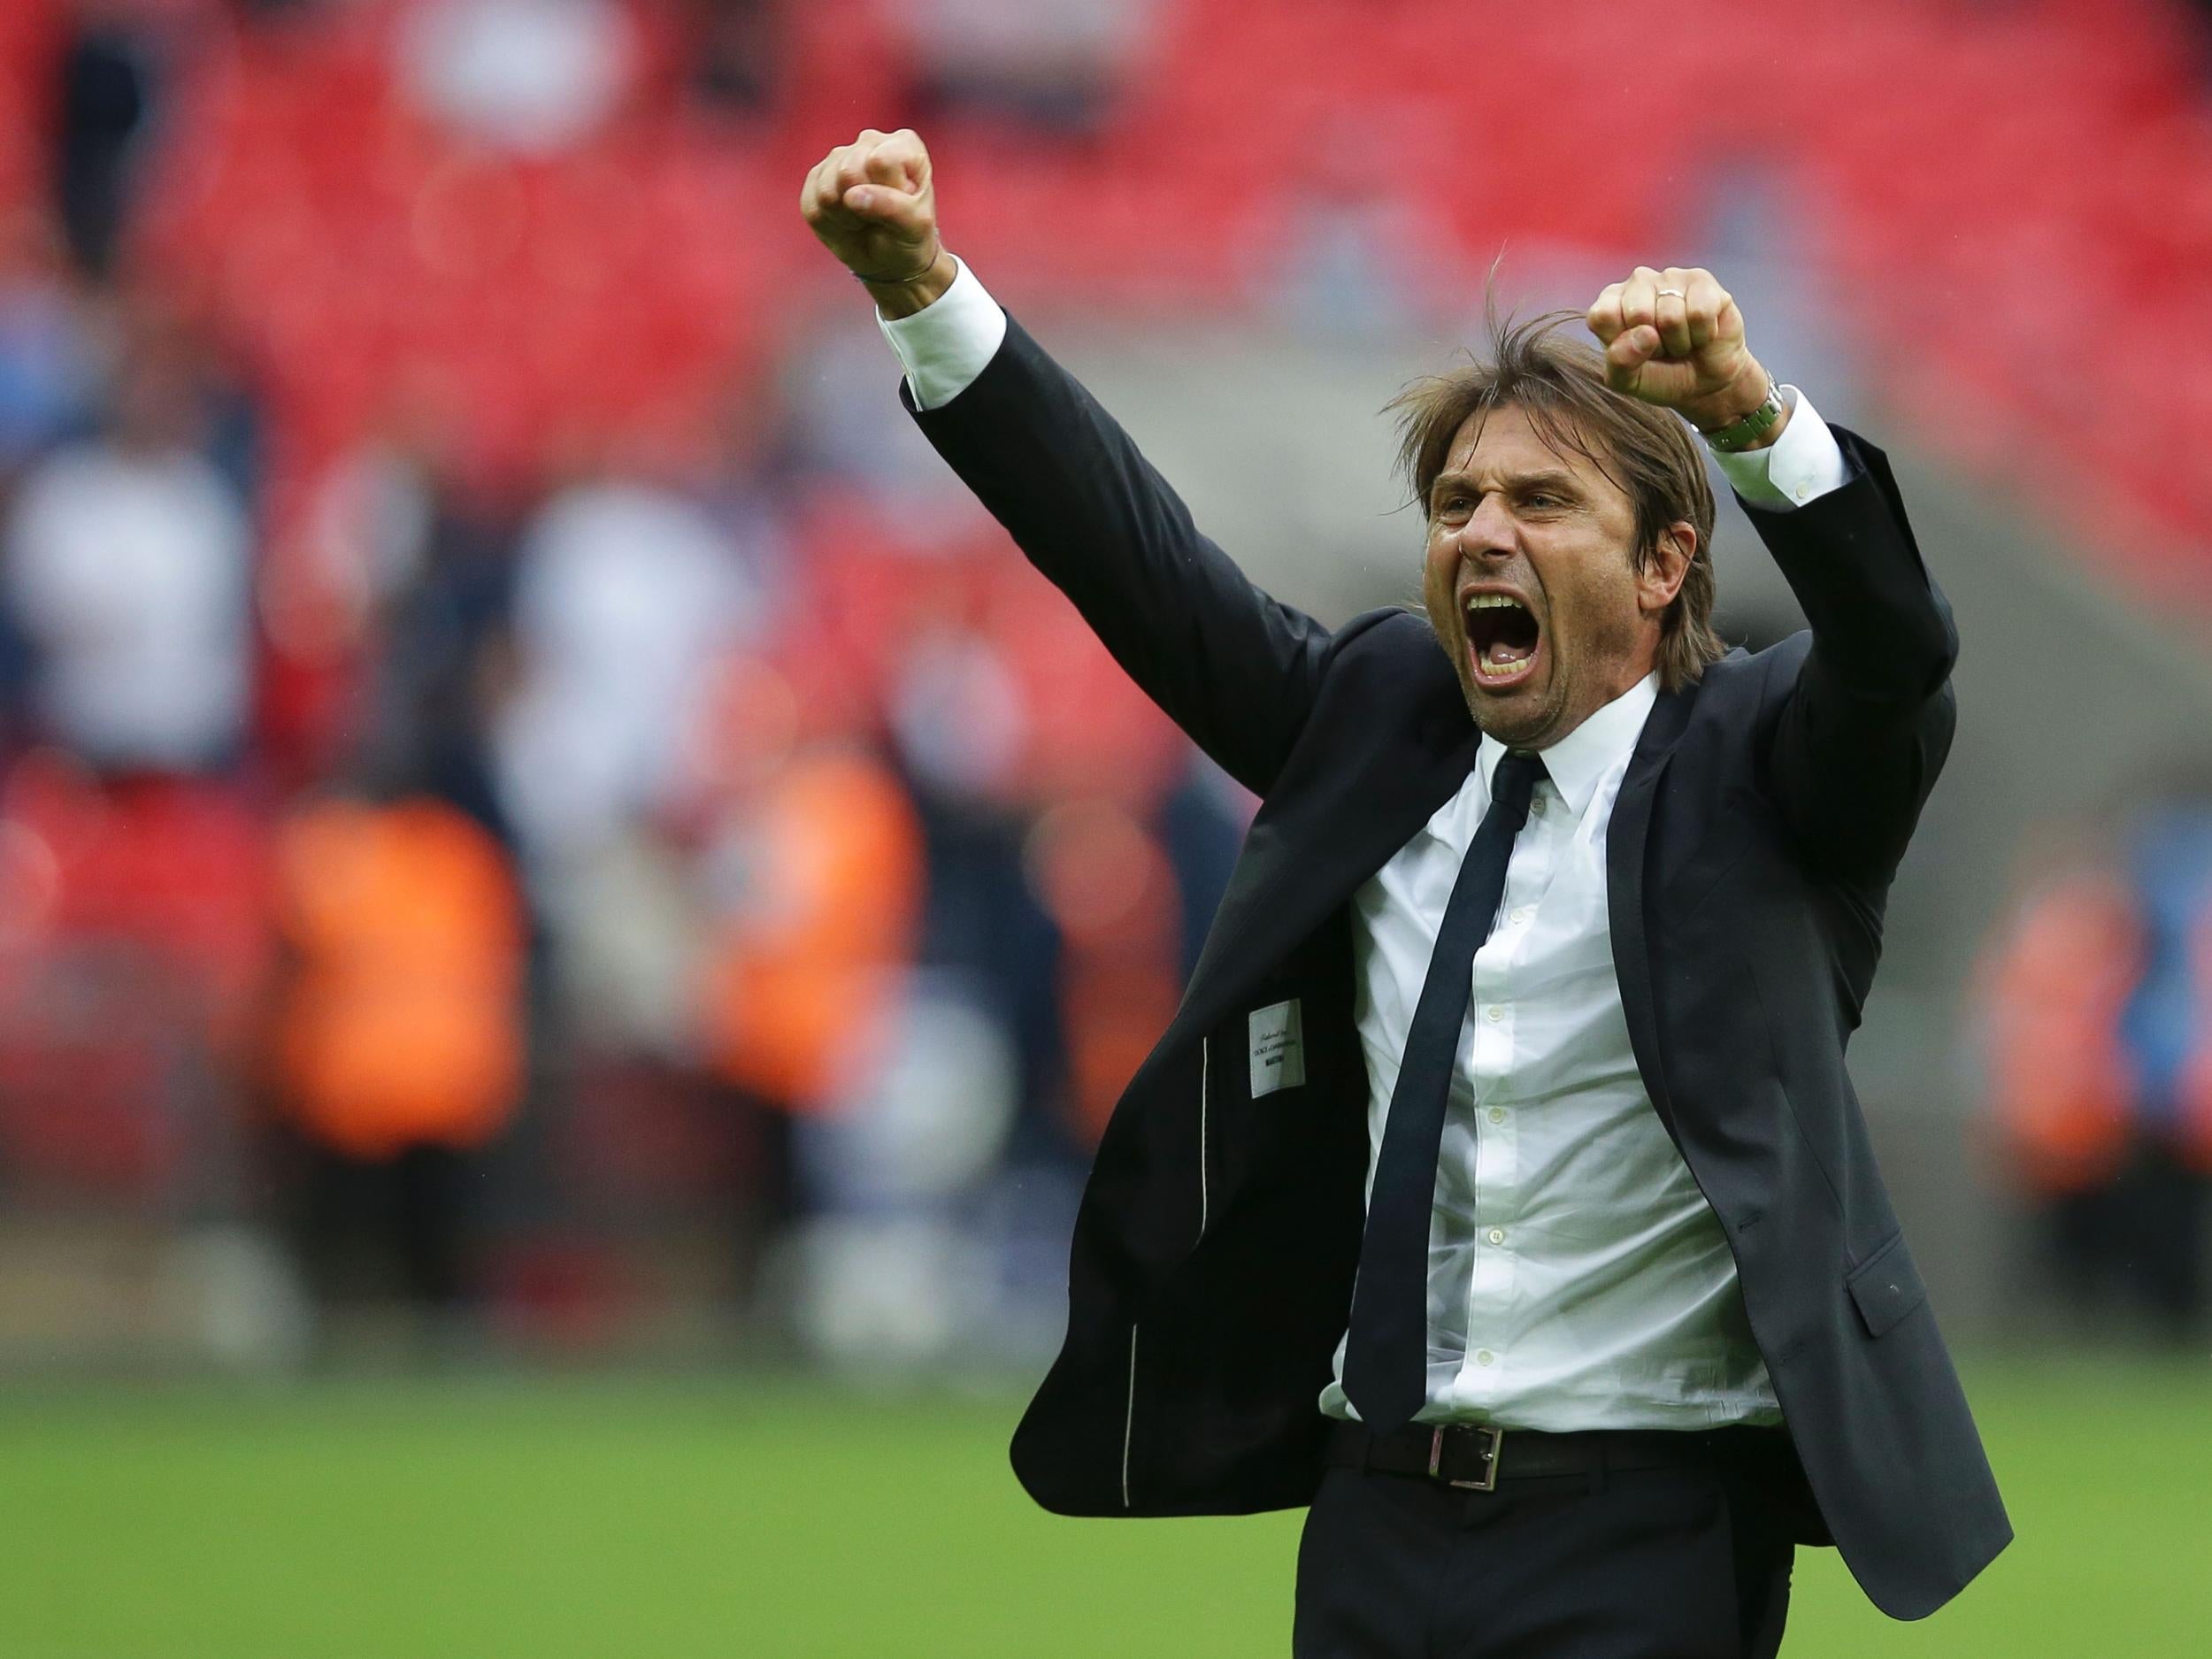 Conte's Chelsea qualified for the Champions League as last year's Premier League winners